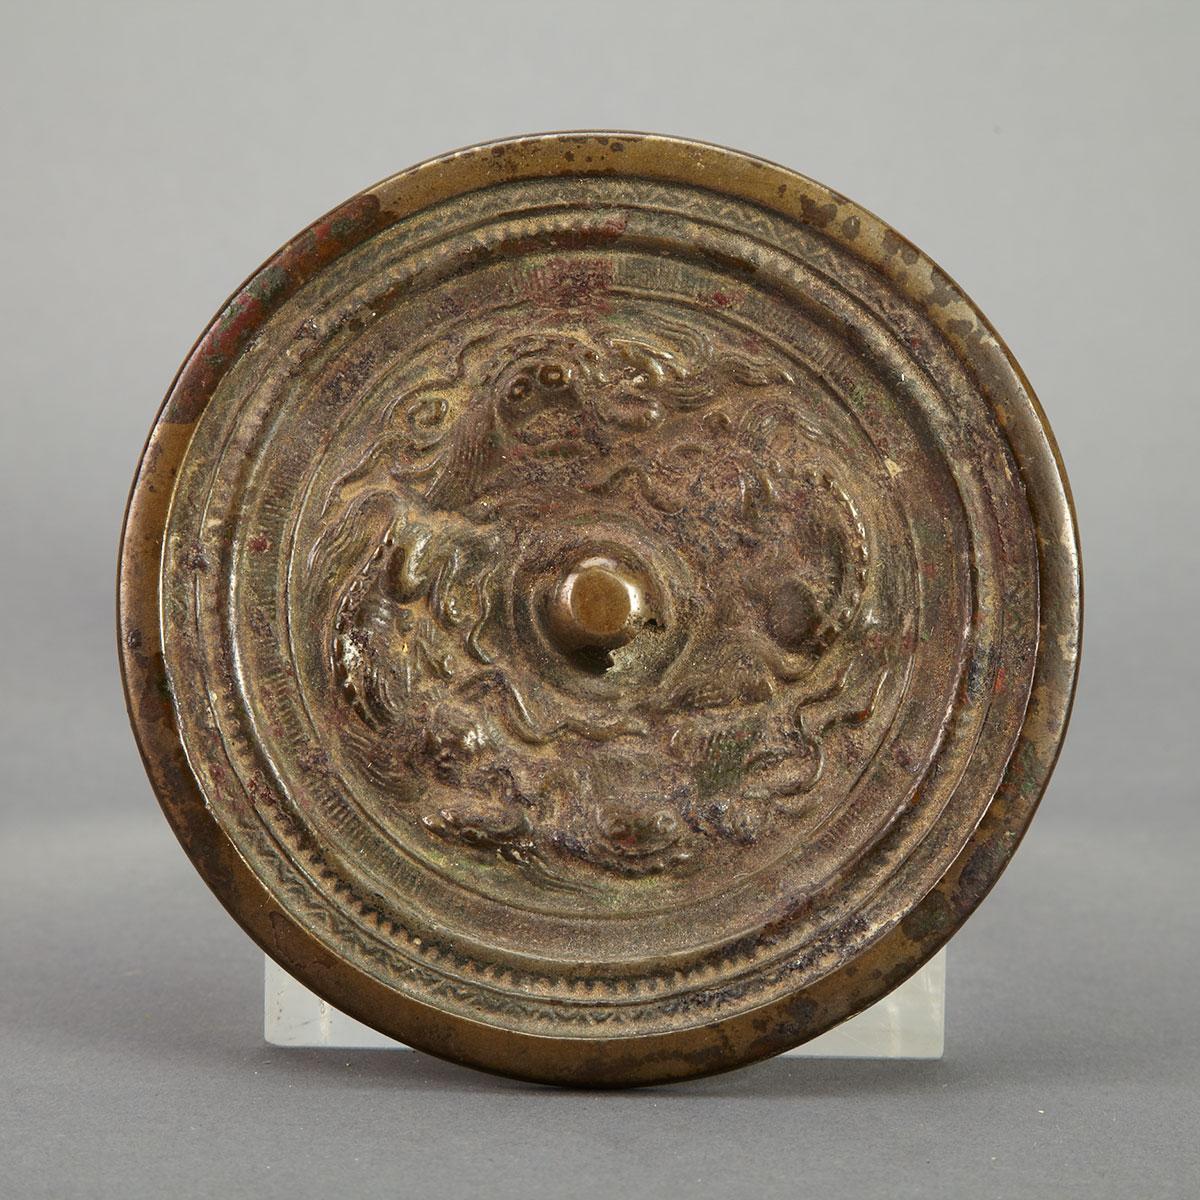 Bronze ‘Mythical Beast’ Mirror, Ming Dynasty or Earlier